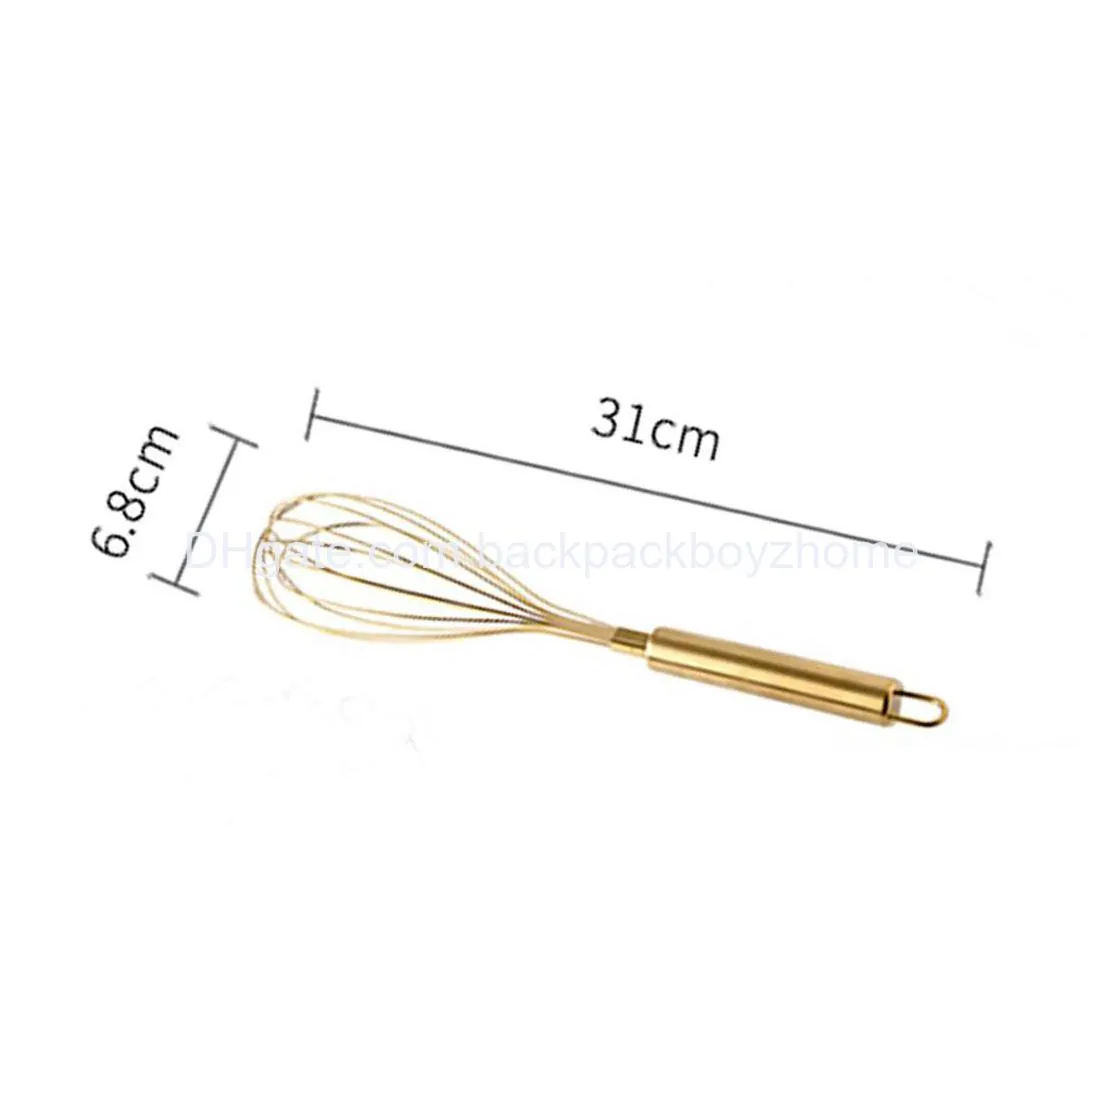 1pcs gold stainless steel egg beater hand whisk egg mixer baking cake tool baking set home egg tools kitchen accessories for factory price expert design